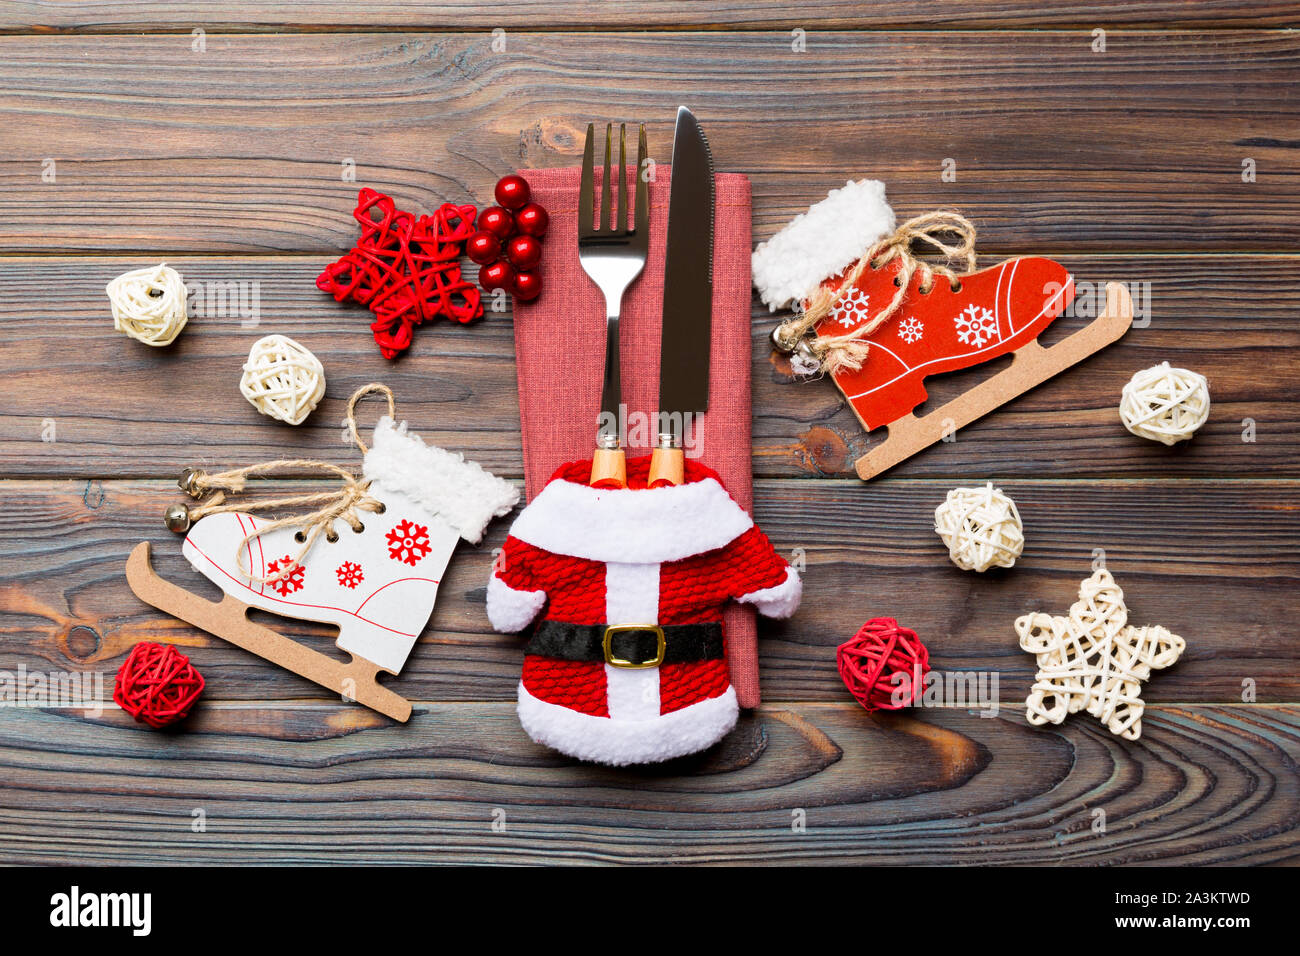 Top view of fork and knife on napkin on wooden background. Different christmas decorations and toys. Close up of New Year dinner concept. Stock Photo